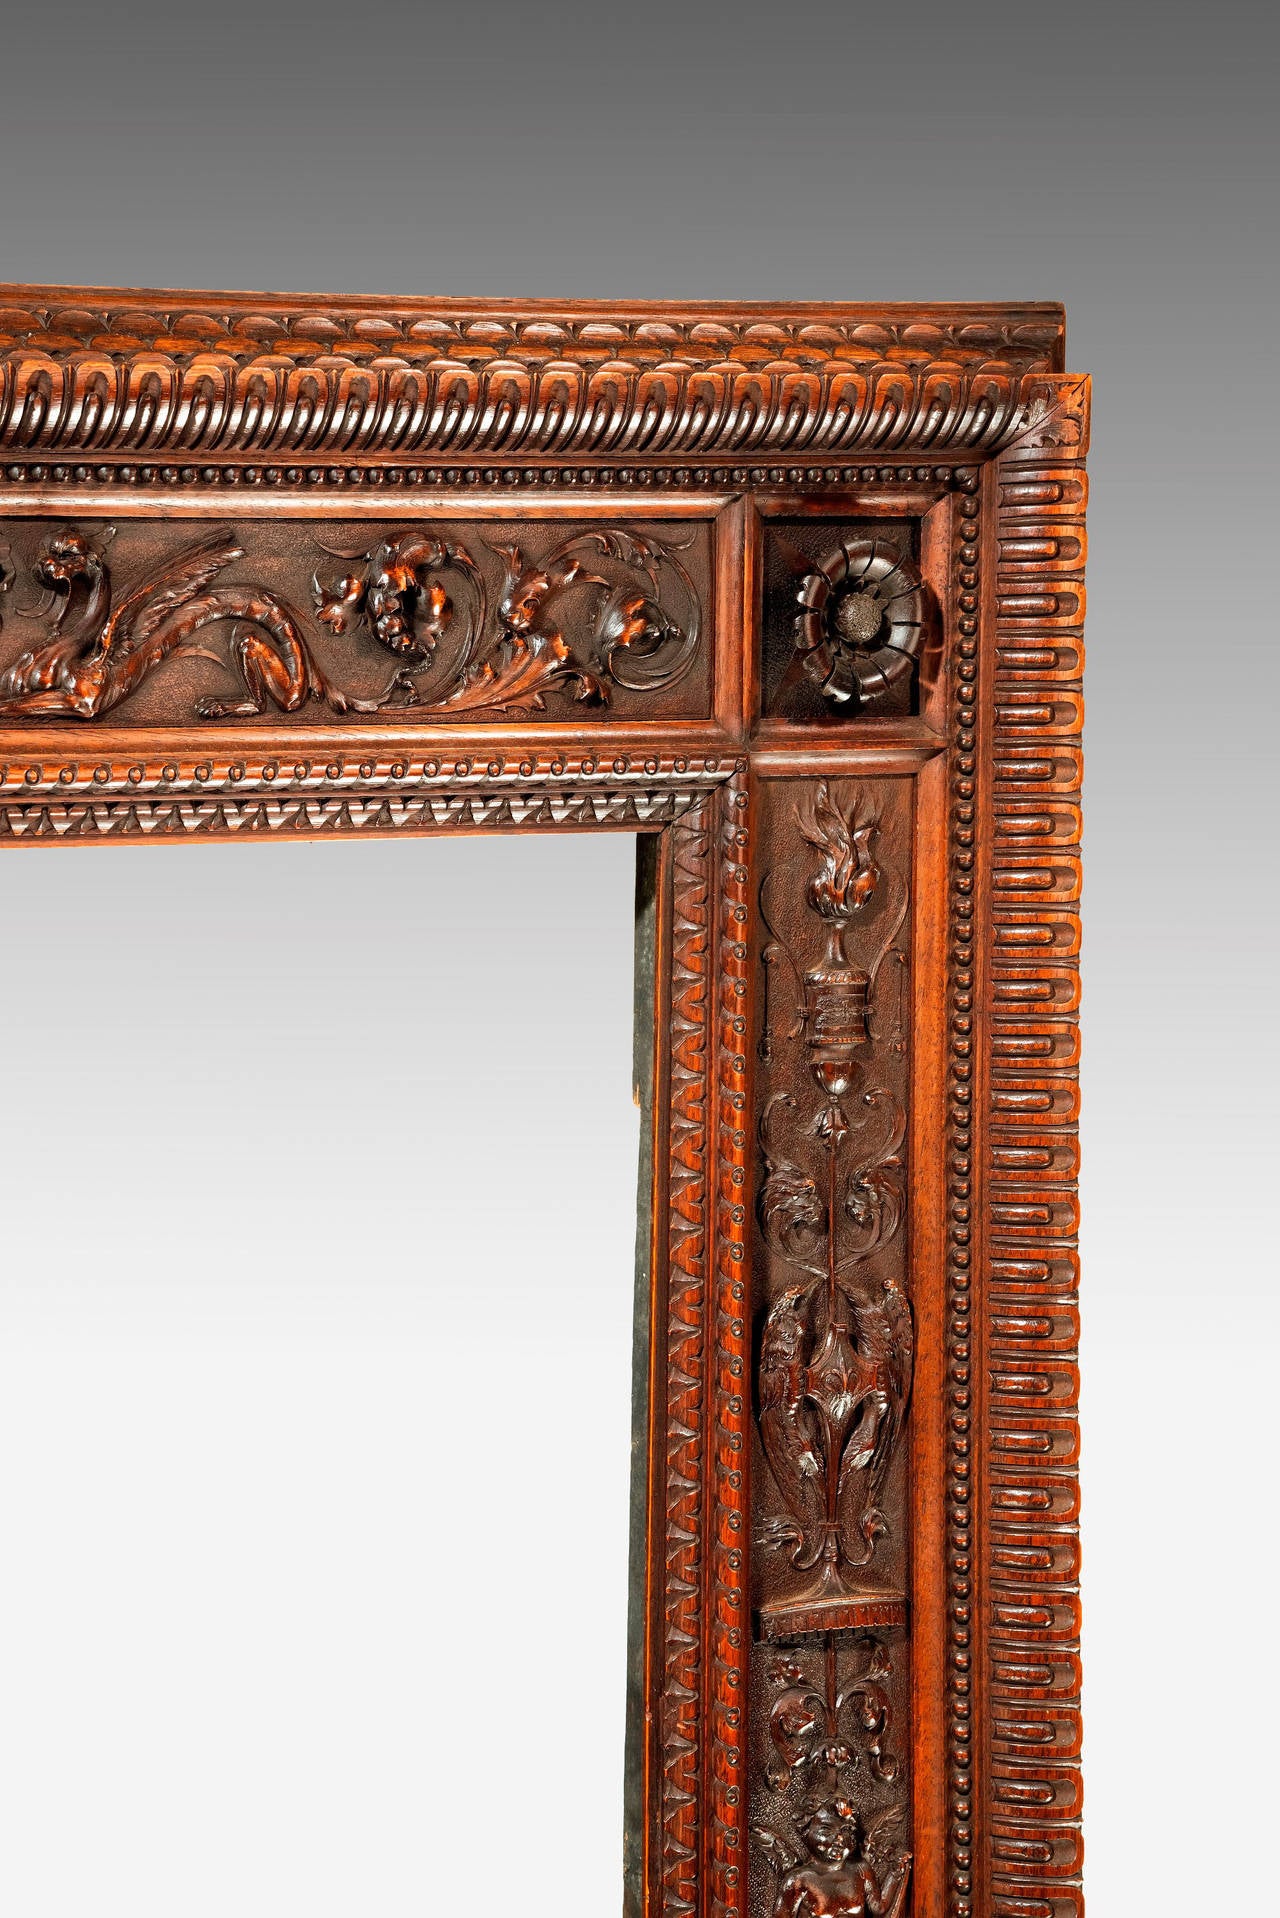 19th Century Carved Frame in the manner of Mariano Coppede.

Mariano Coppede was born under the rule of the Grand Duchy of Tuscany , from Assumption Masini and a tailor, Luigi Coppedè. Five years after he was orphaned. Was thus entrusted first